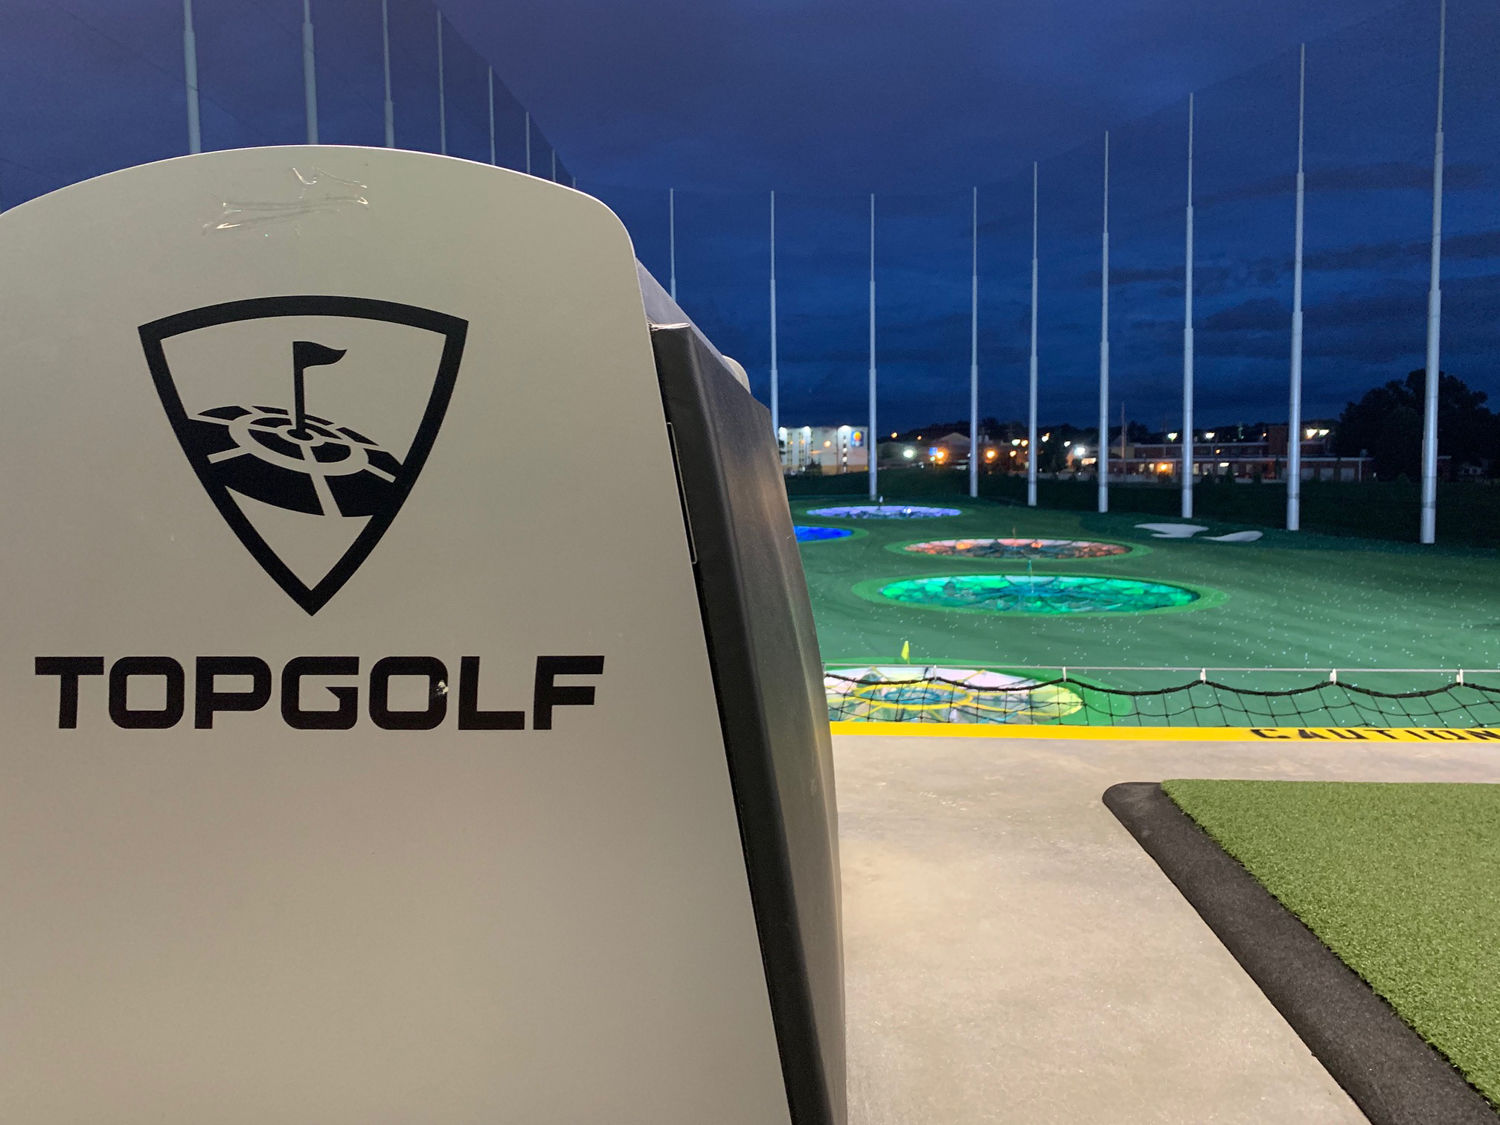 The new Topgolf National Harbor is set to open later in June, but the company has no immediate plans to close their Alexandria location. (WTOP/Noah Frank)